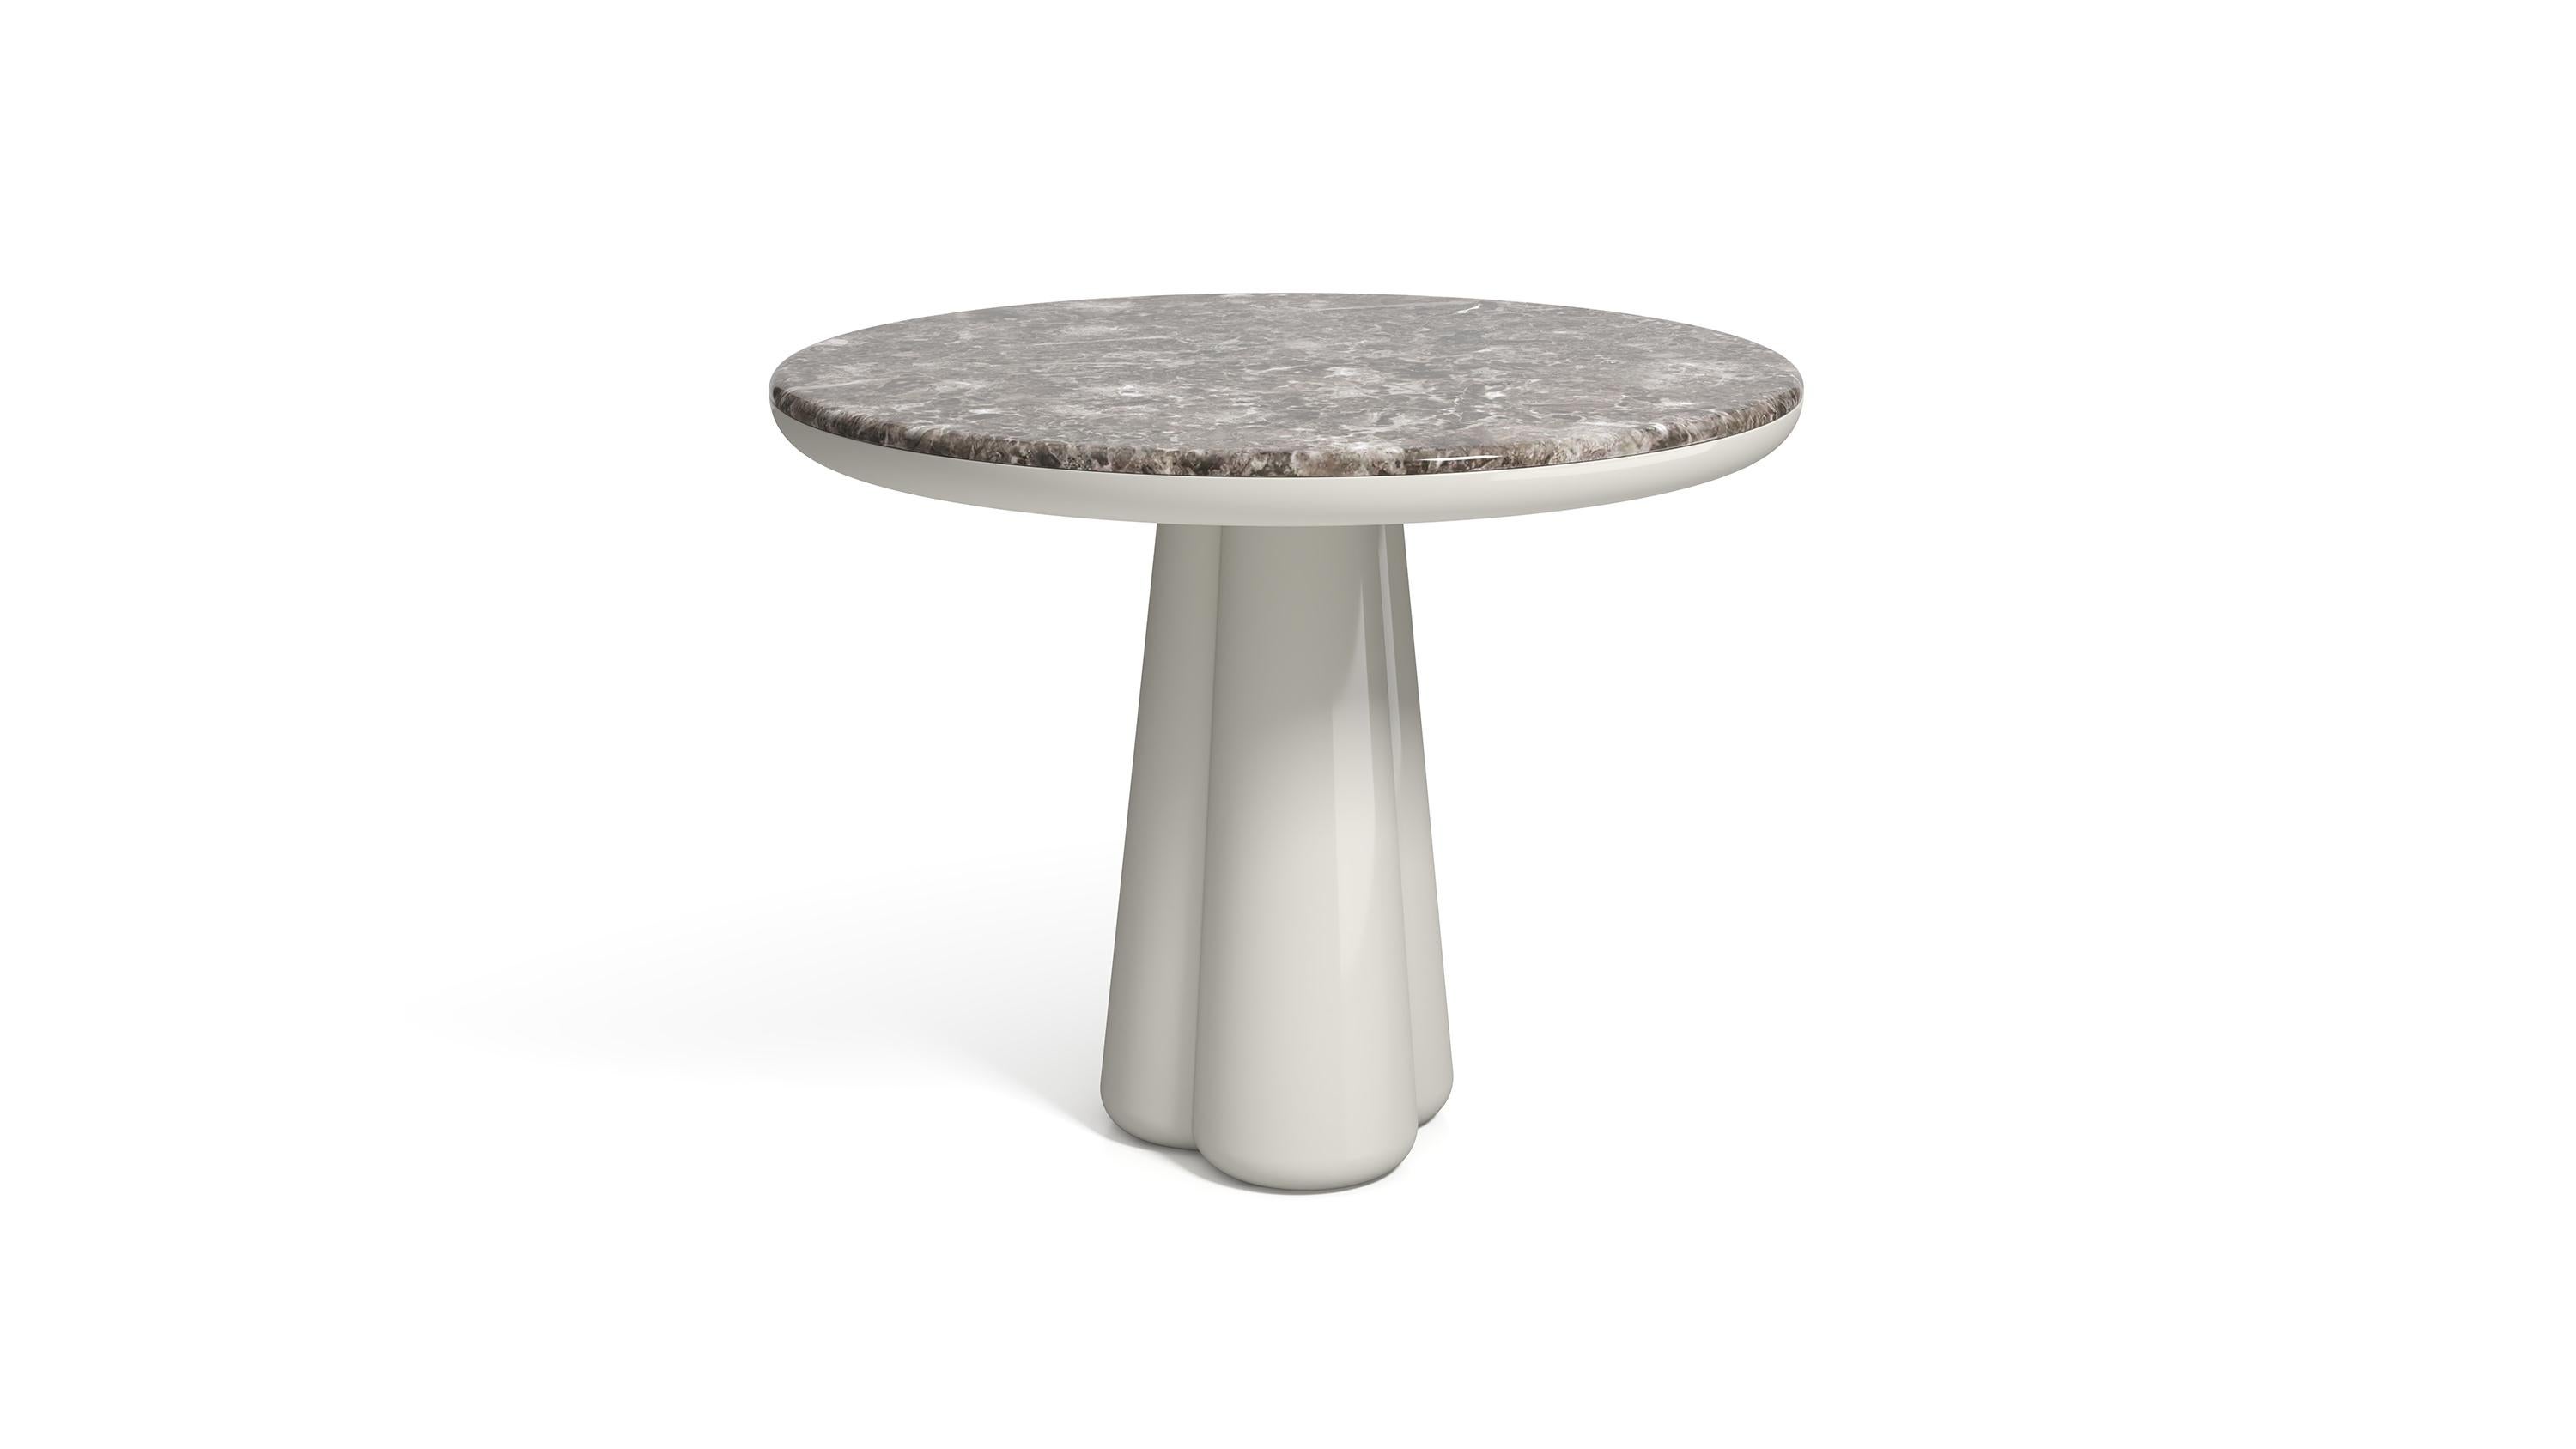 21st Century Elena Salmistraro Table Polyurethane Marble top Glossy Legs Isotopo In New Condition For Sale In Tezze sul Brenta, IT